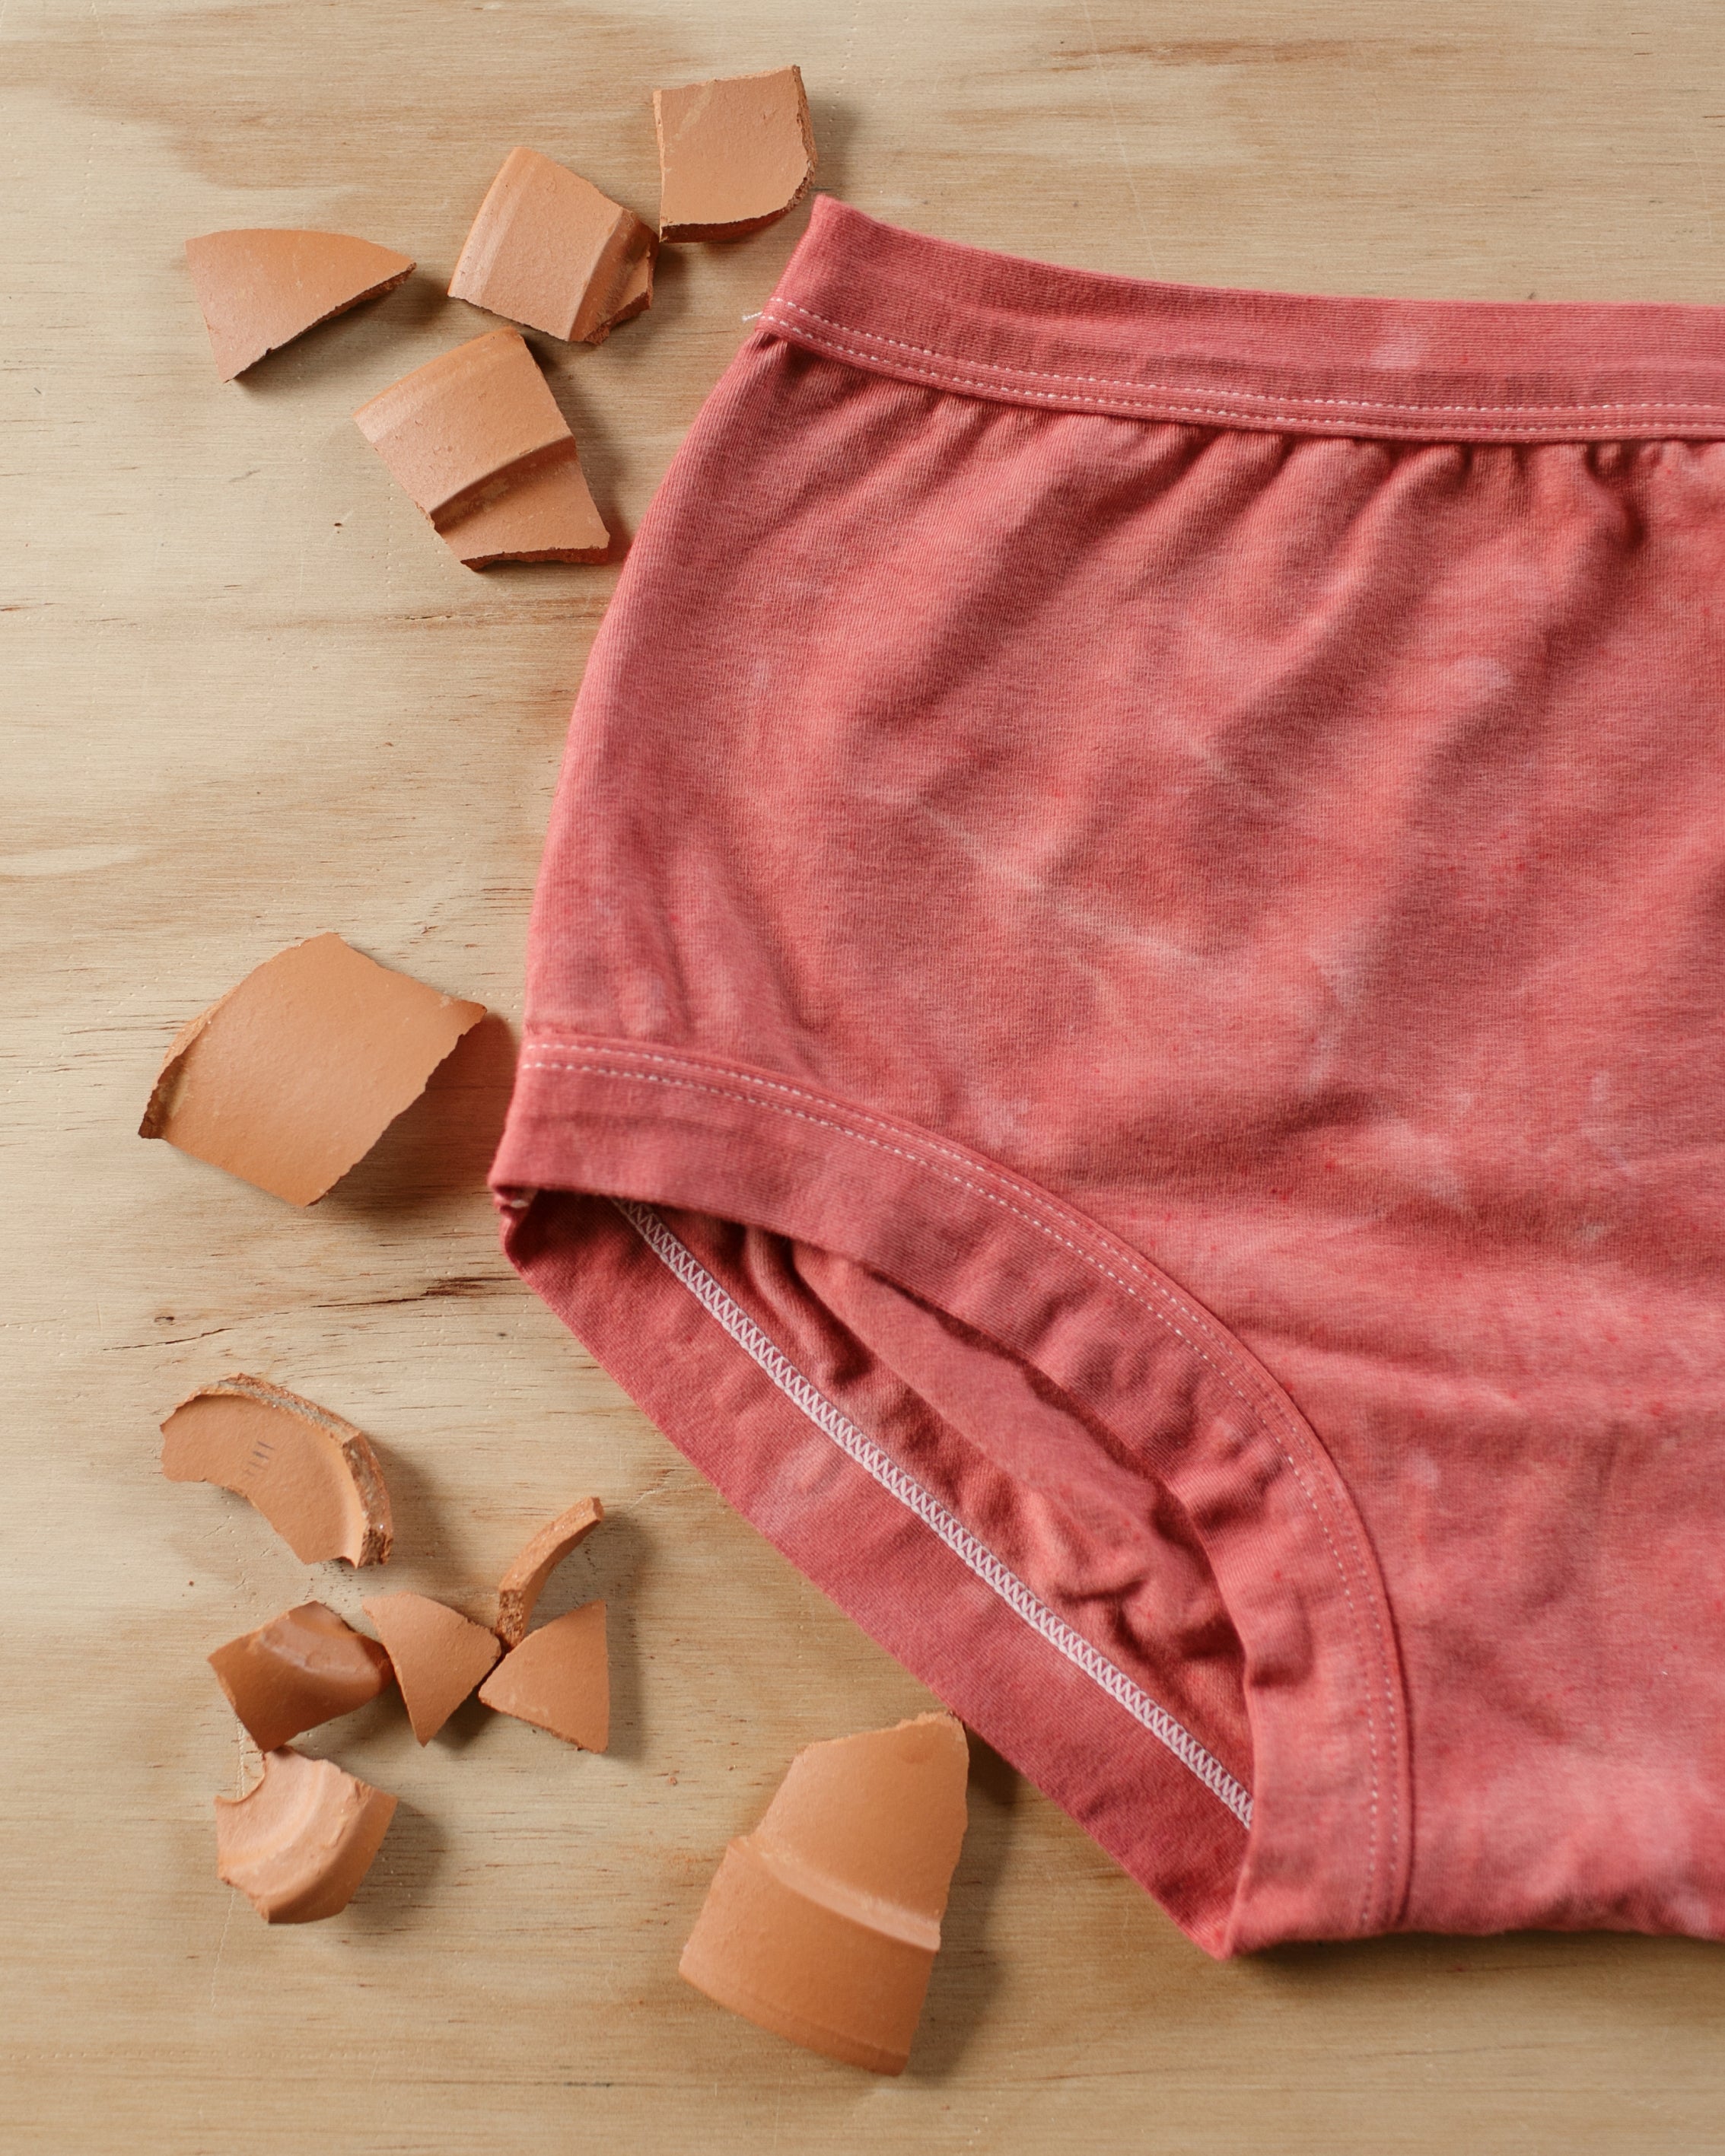 Flat lay of Thunderpants Organic Cotton Original style underwear in hand dyed Terracotta color with broken terracotta around.